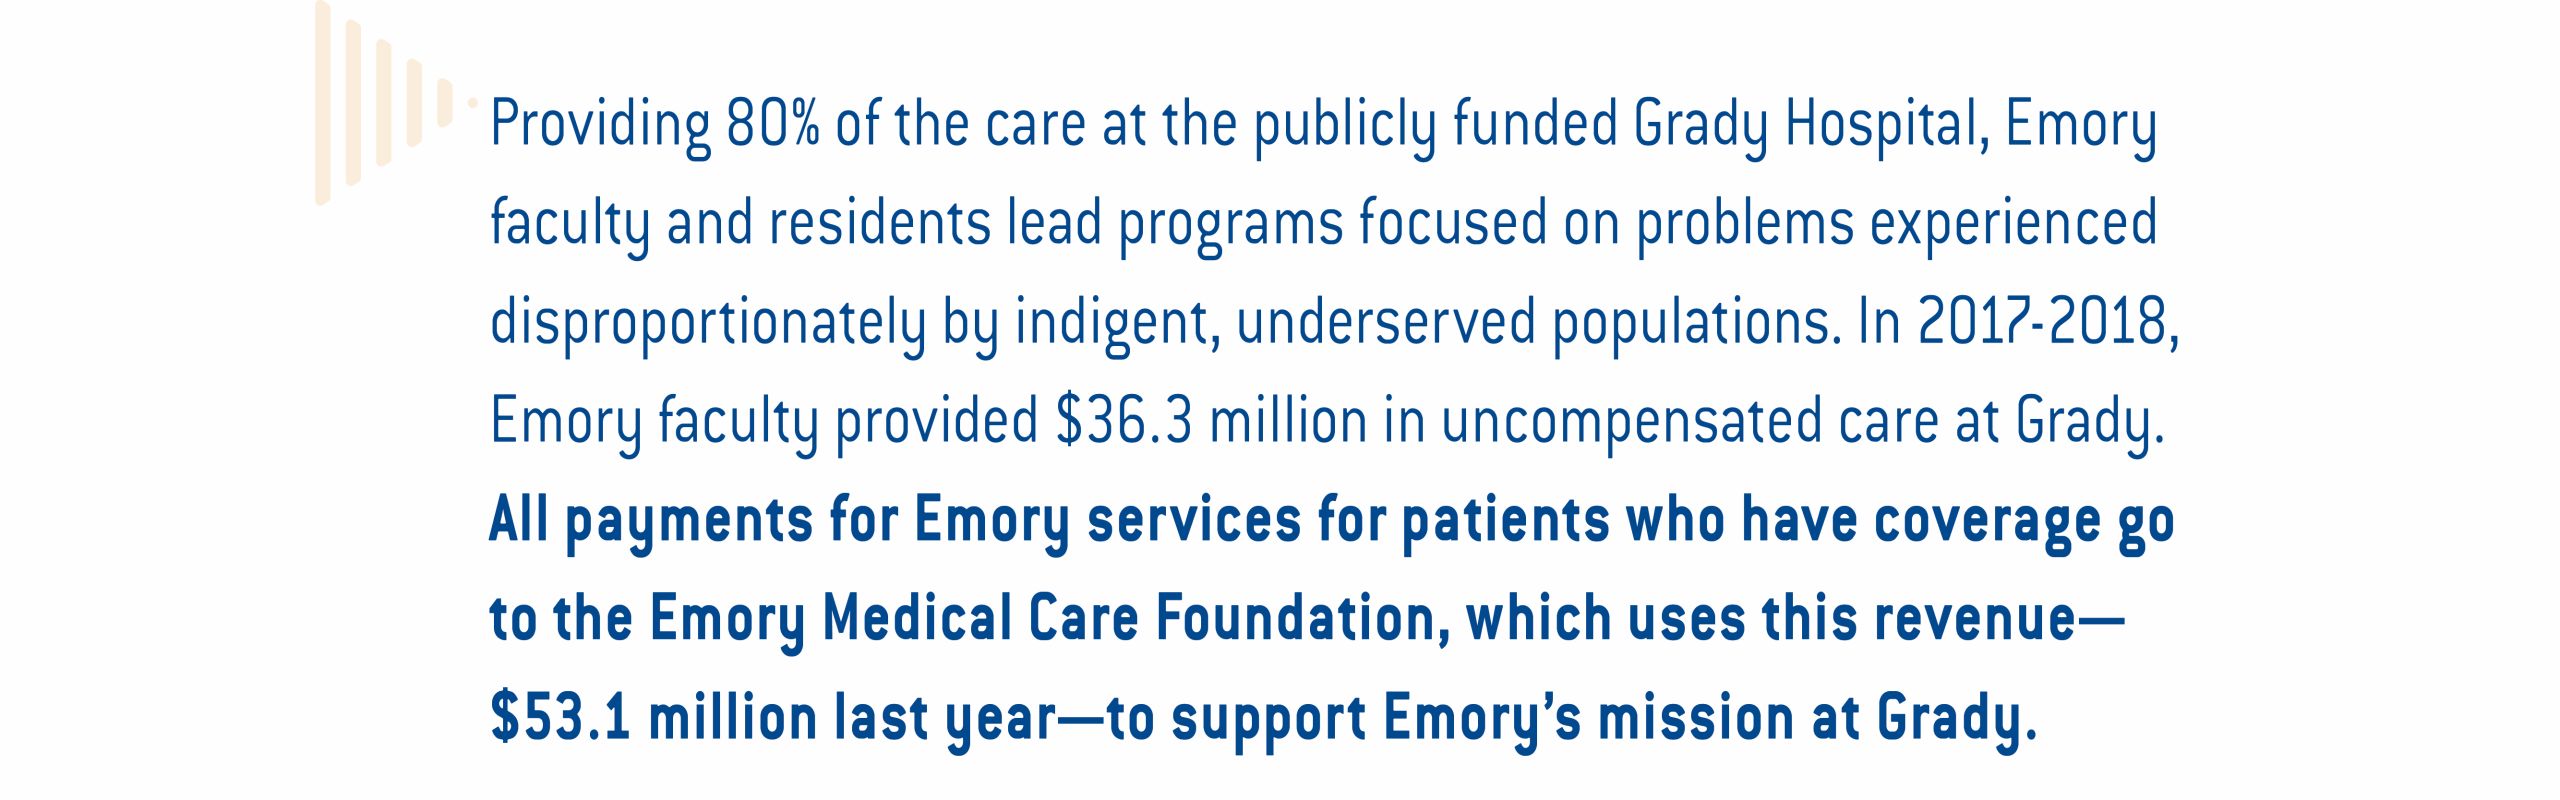 Image containing the following pull quote Providing 80% of the care at the publicly funded Grady Hospital, Emory faculty and residents lead programs focused on problems experienced disproportionately by indigent, underserved populations. In 2017-2018, Emory faculty provided $36.3 million in uncompensated care at Grady. All payments for Emory services for patients who have coverage go to the Emory Medical Care Foundation, which uses this revenue—$53.1 million last year—to support Emory’s mission at Grady.